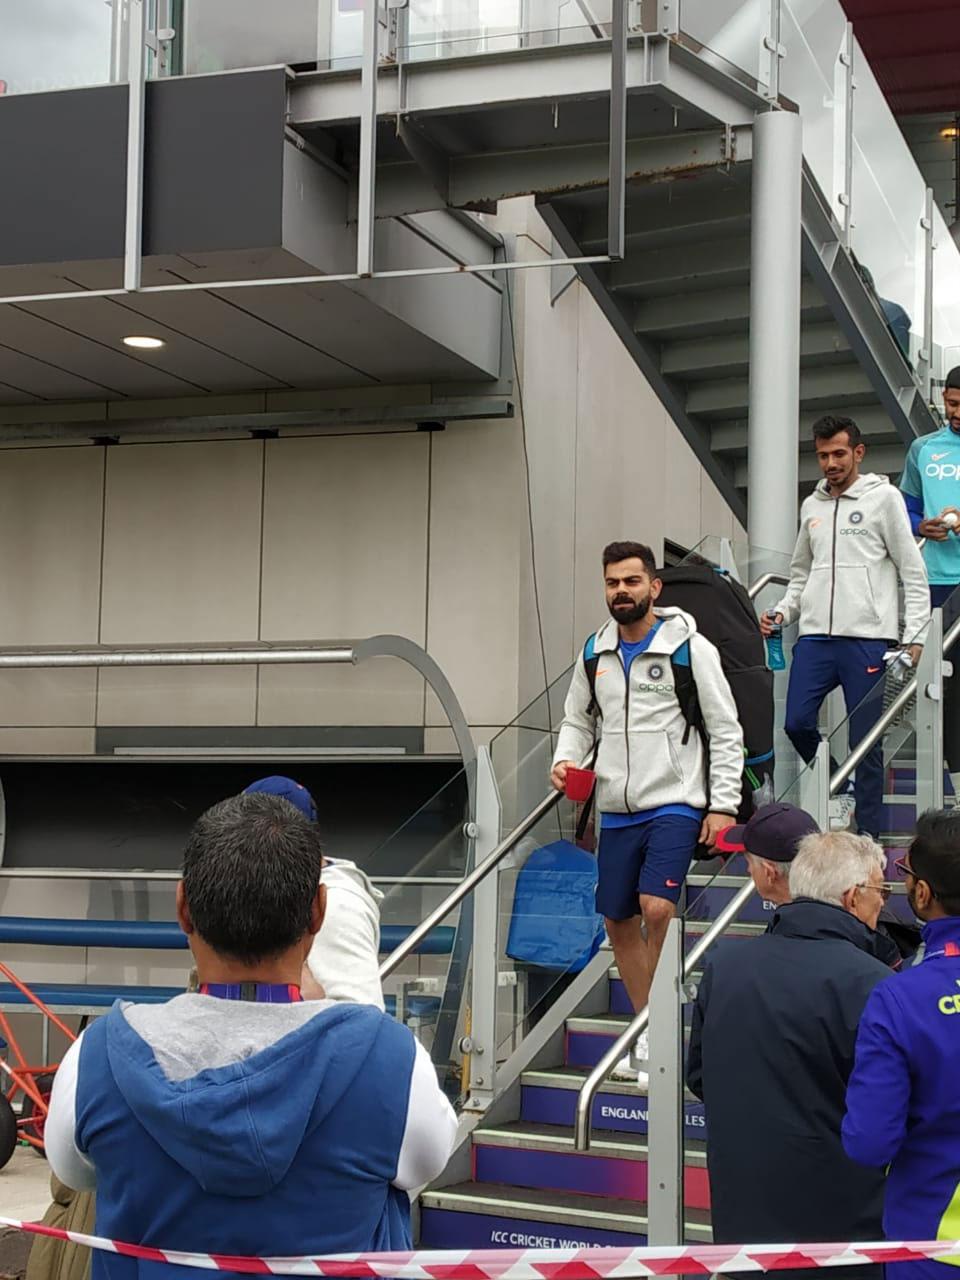 Virat Kohli walks in to train ahead of India vs Pakistan clash. His performances will be very crucial for the Men in Blue.